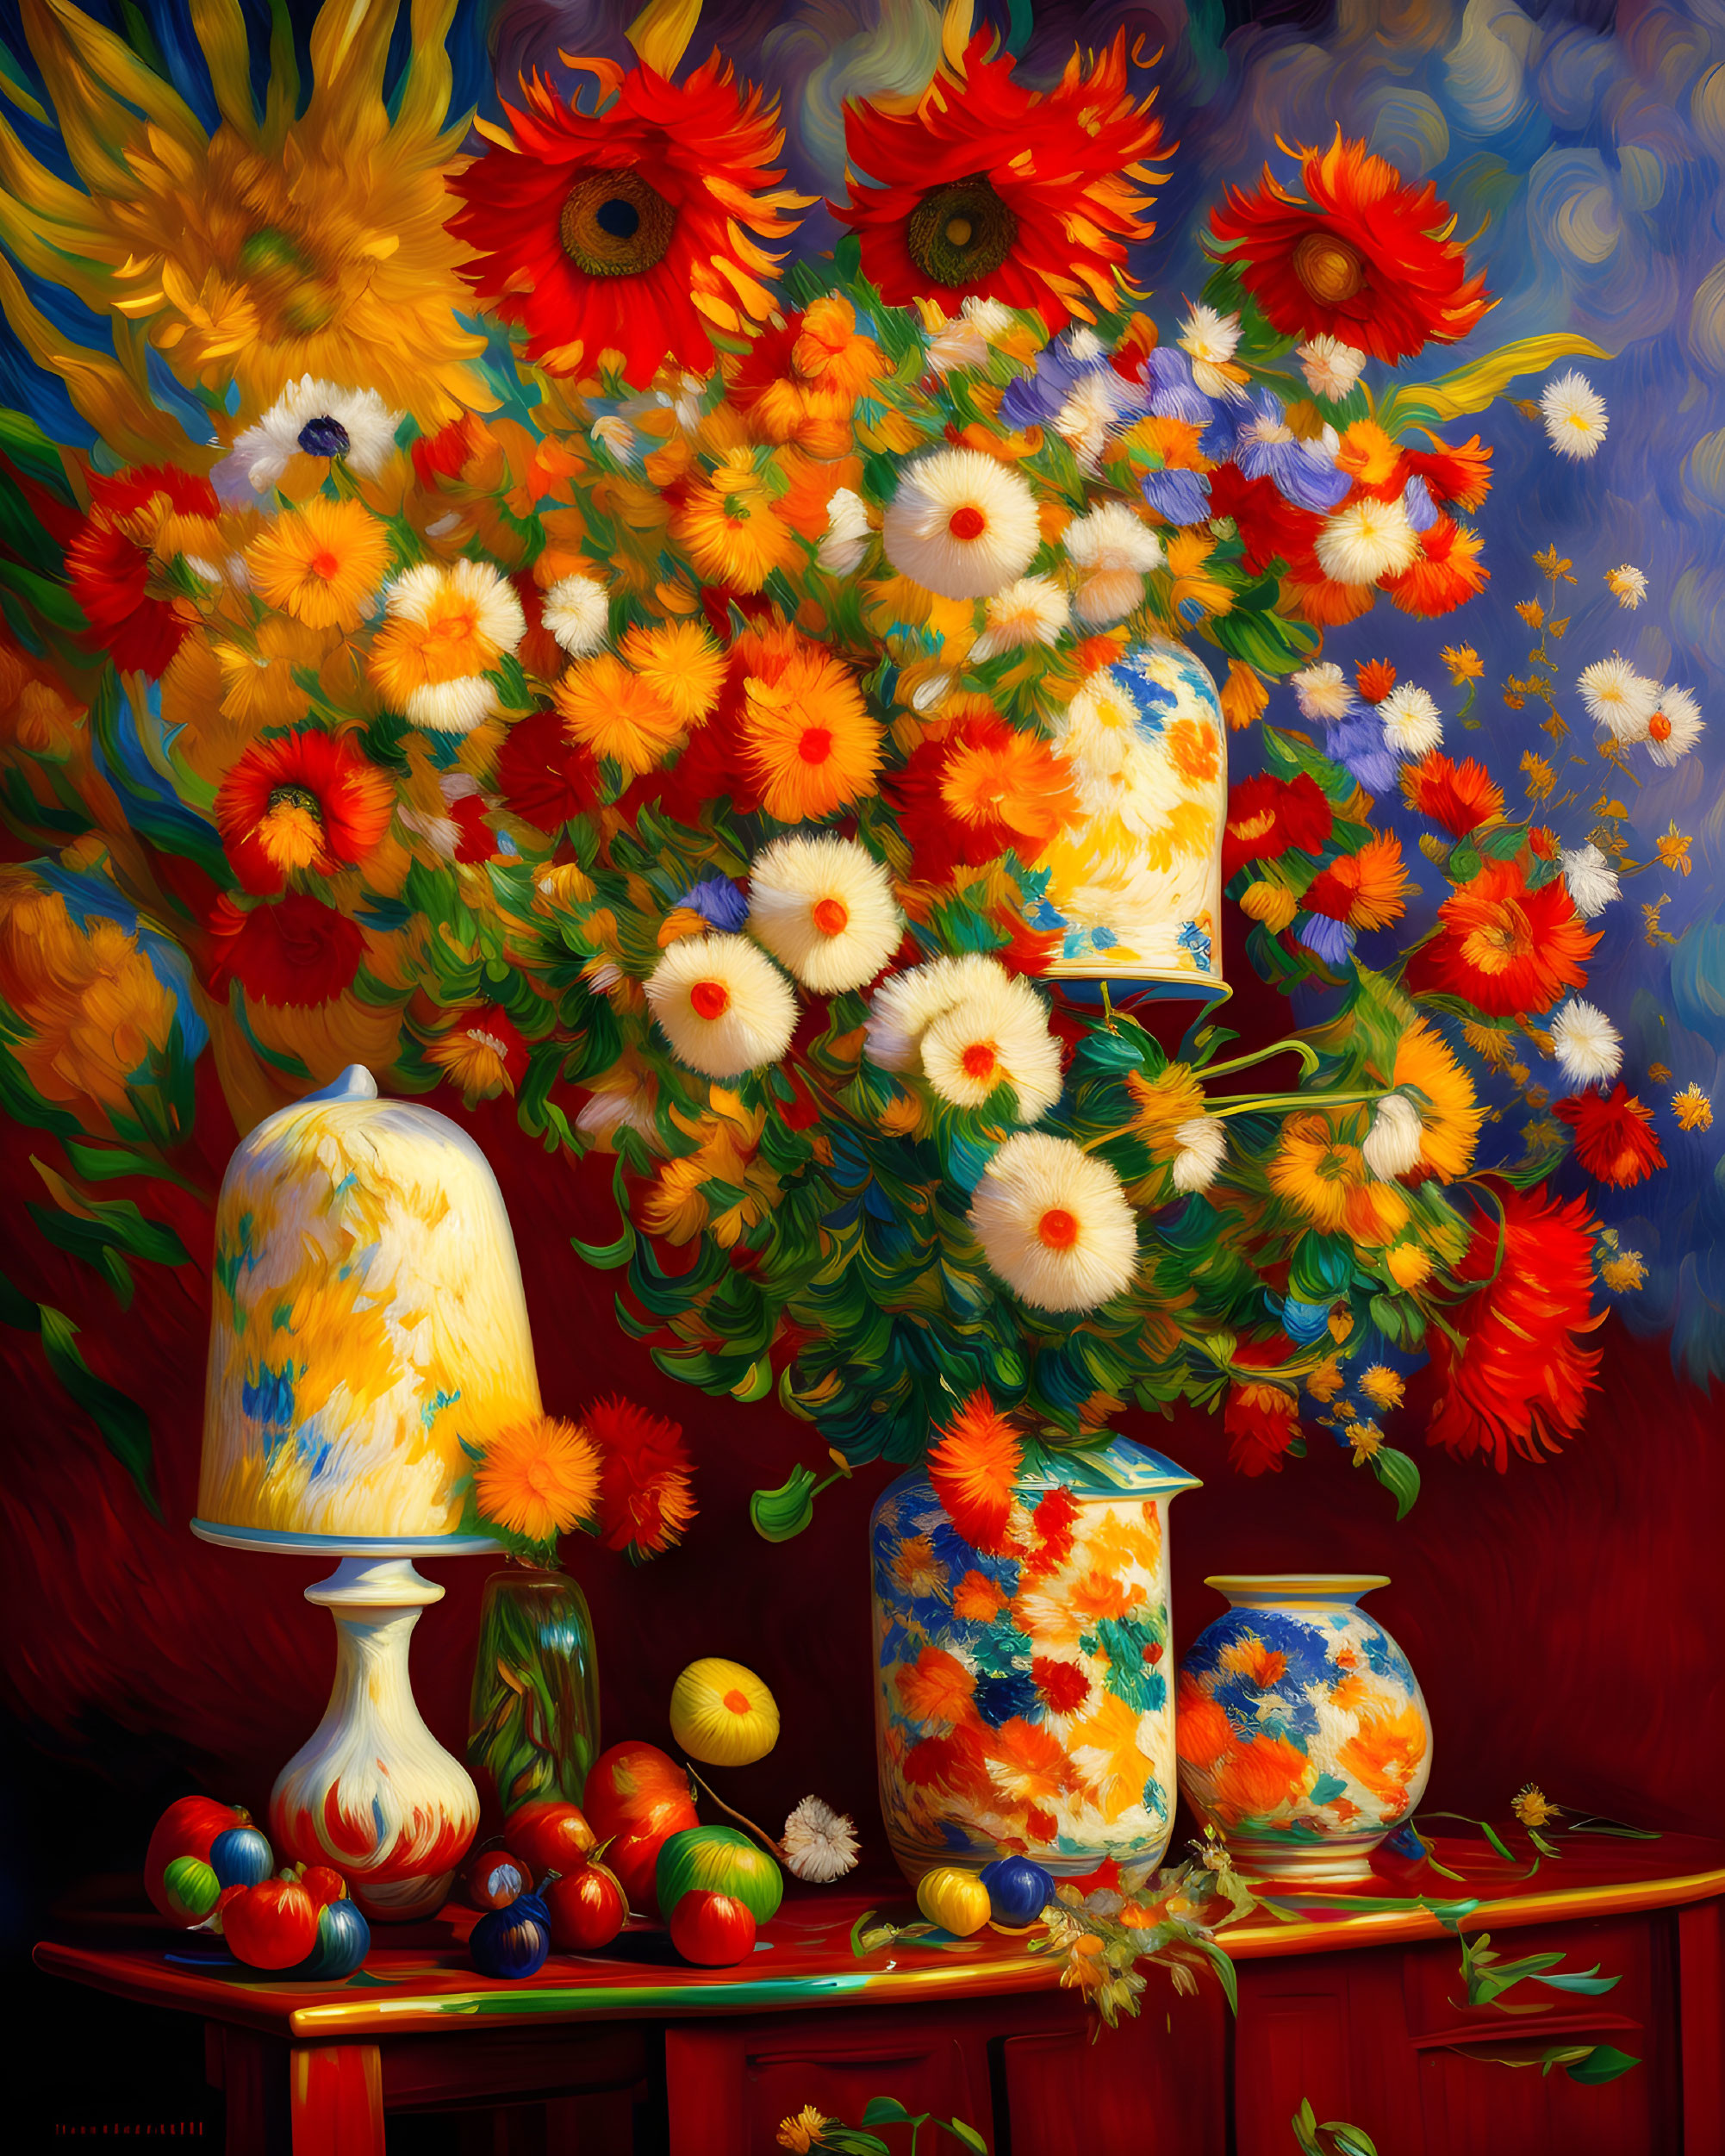 Colorful Flower Still Life Painting with Fruit and Lamp on Red Table